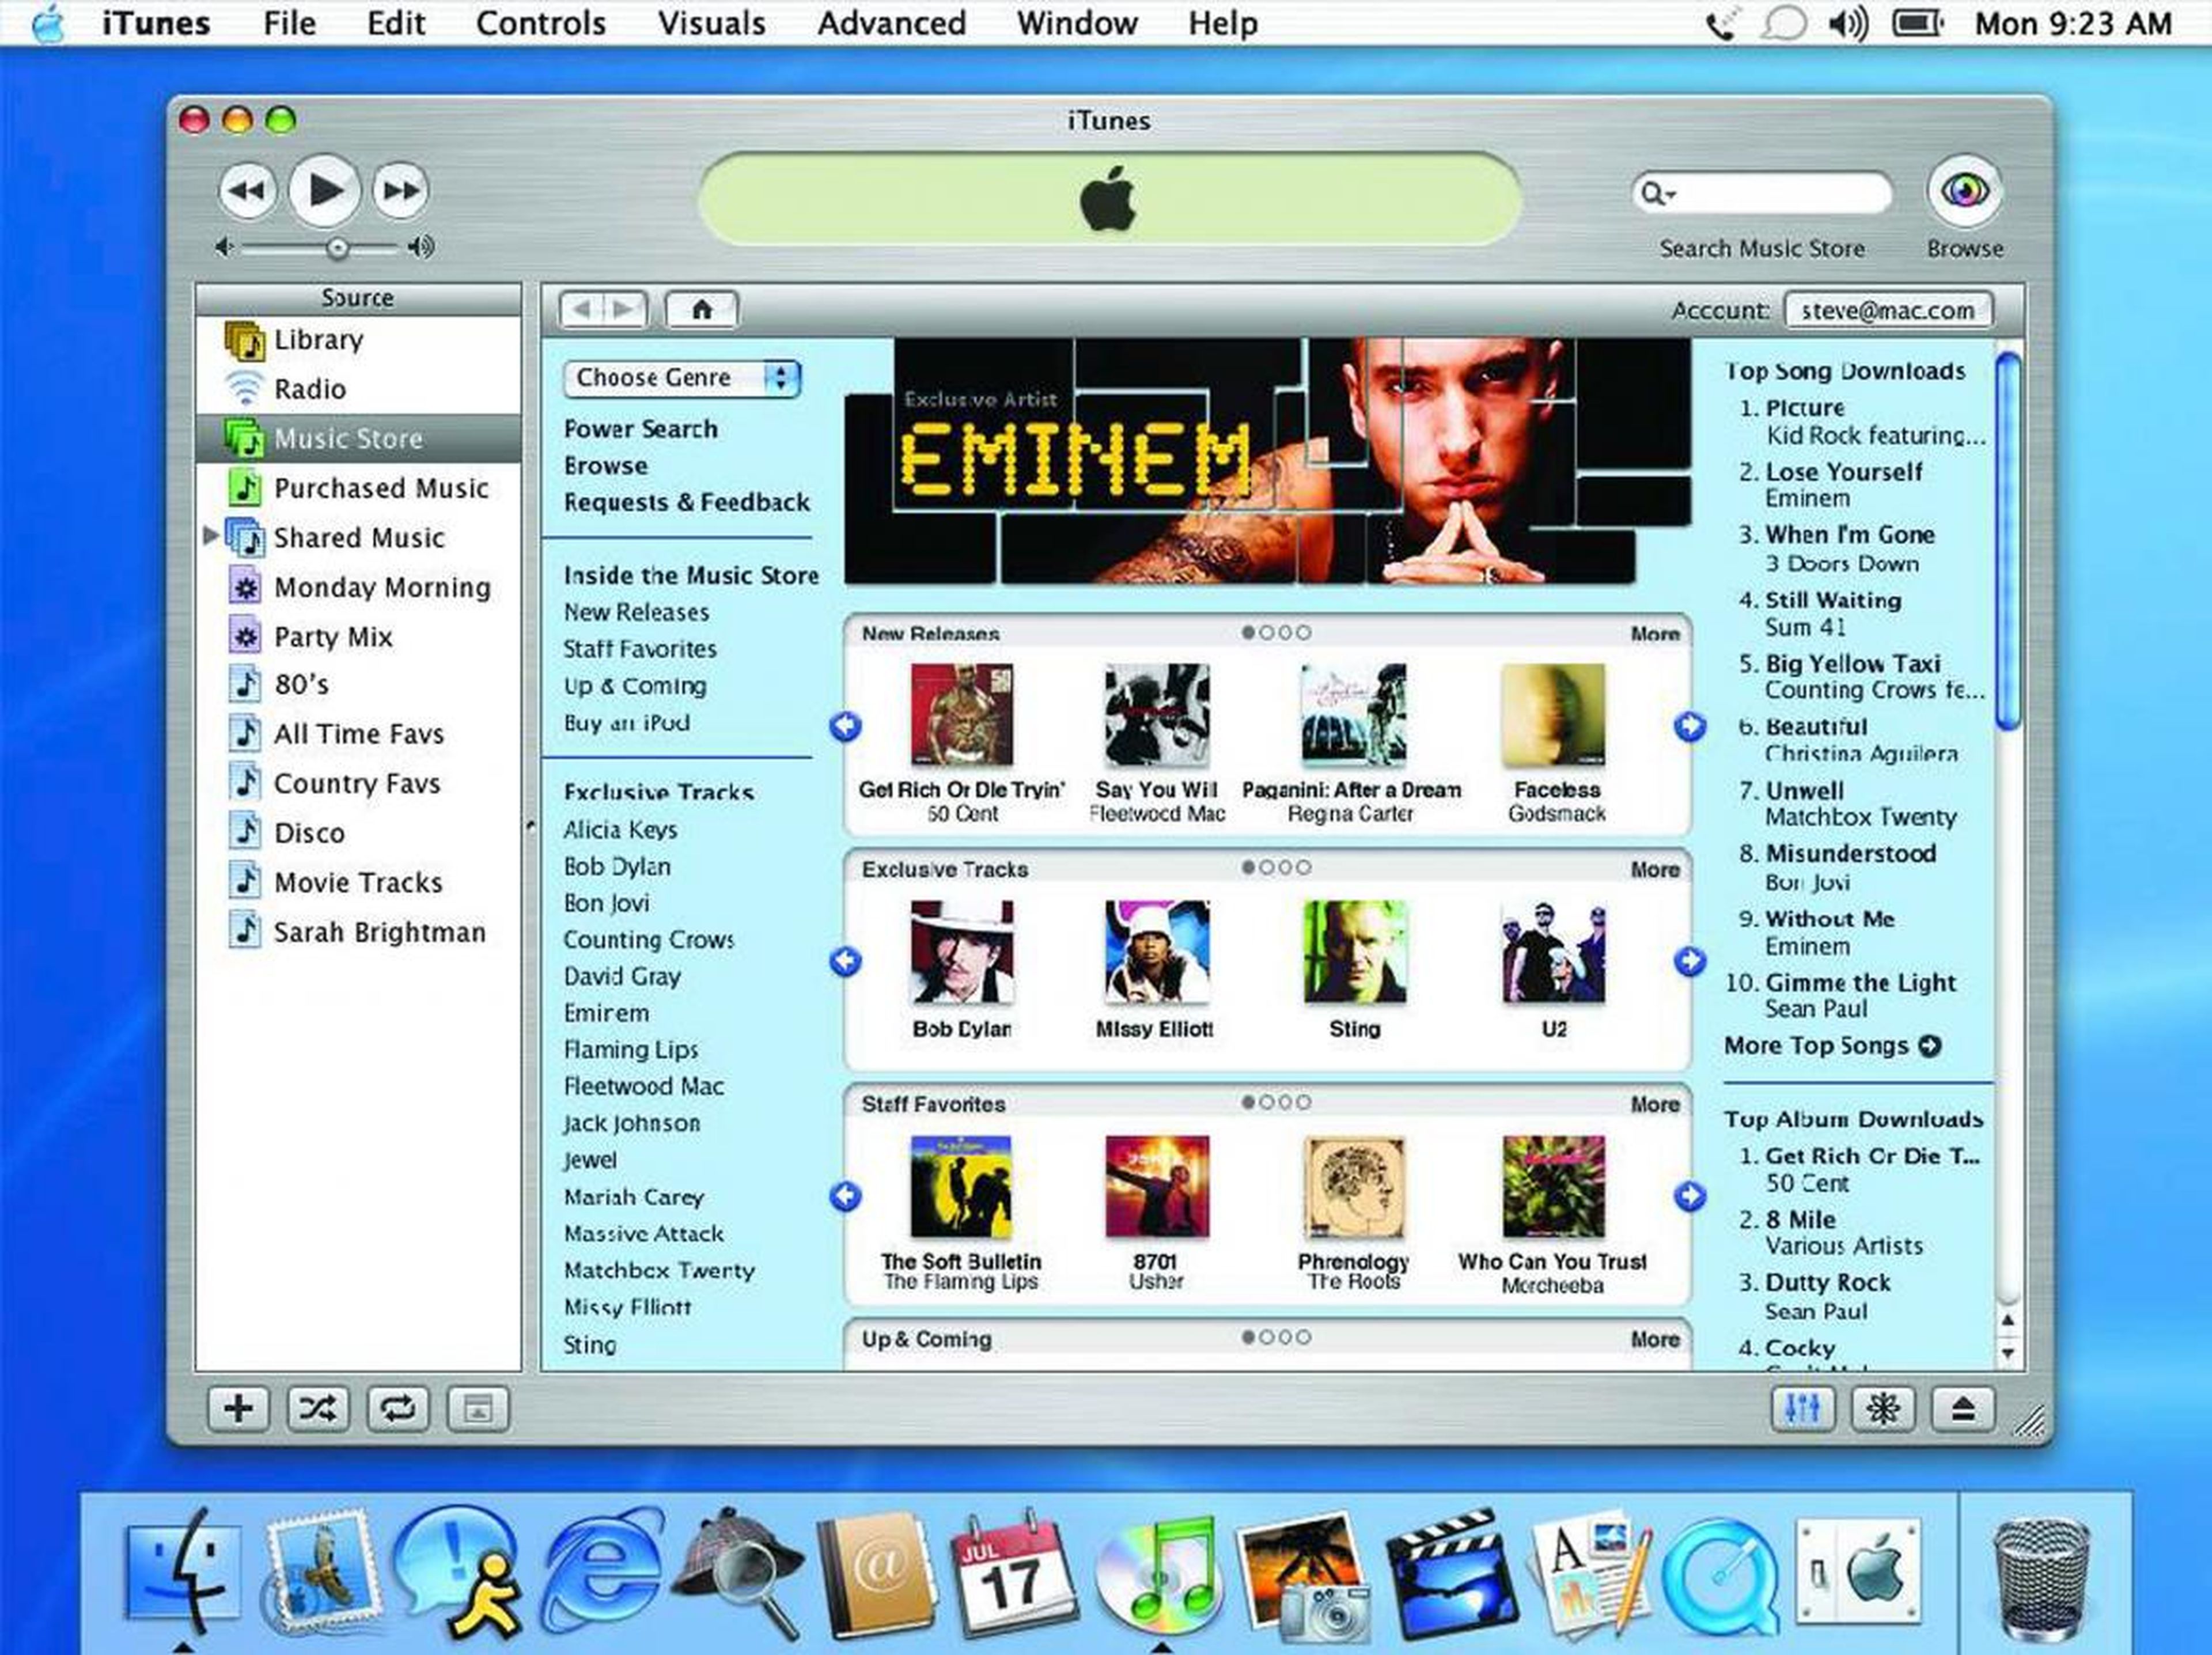 In 2003, Apple opened up the iTunes Music Store, with its novel pricing model of $0.99 per song, to turn the iPod into the center of a digital media universe. Around the same time, both iTunes and the iPod hit Windows, jump